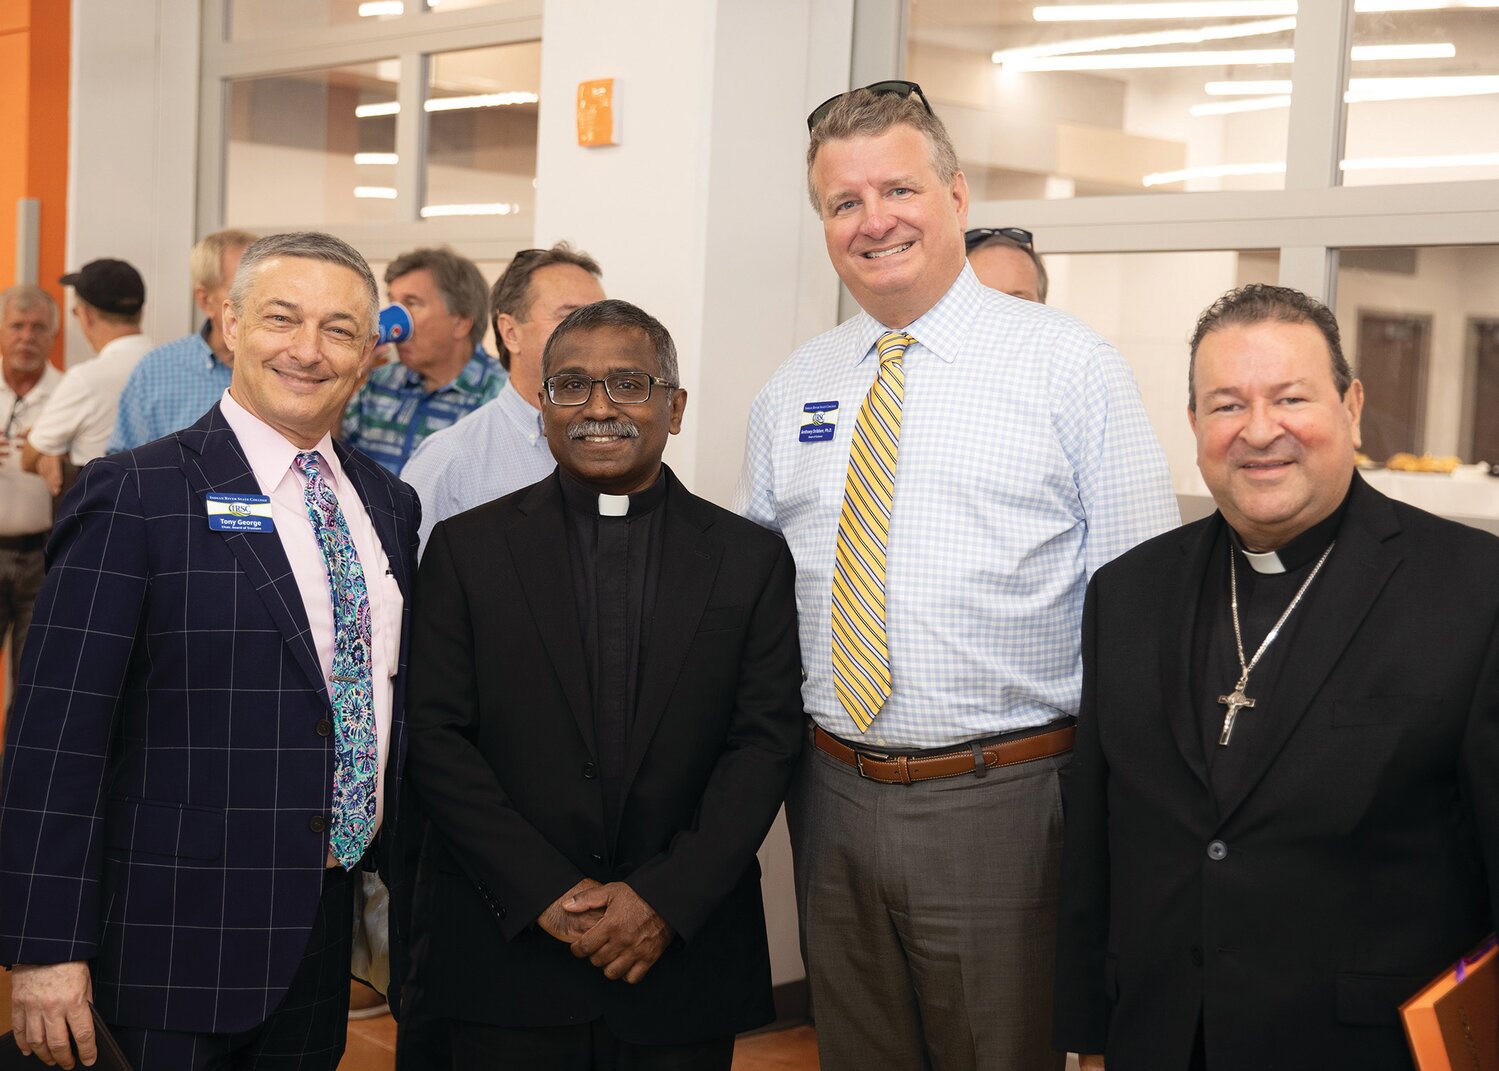 Left to right: Tony George, Chair, IRSC District Board of Trustees; Rev. Chamindra Williams, Parochial Vicar, Holy Cross Catholic Church; Anthony Dribben, IRSC Dean of Science; and Rev. Francisco J. Osorio, Parish Priest, Holy Cross Catholic Church.